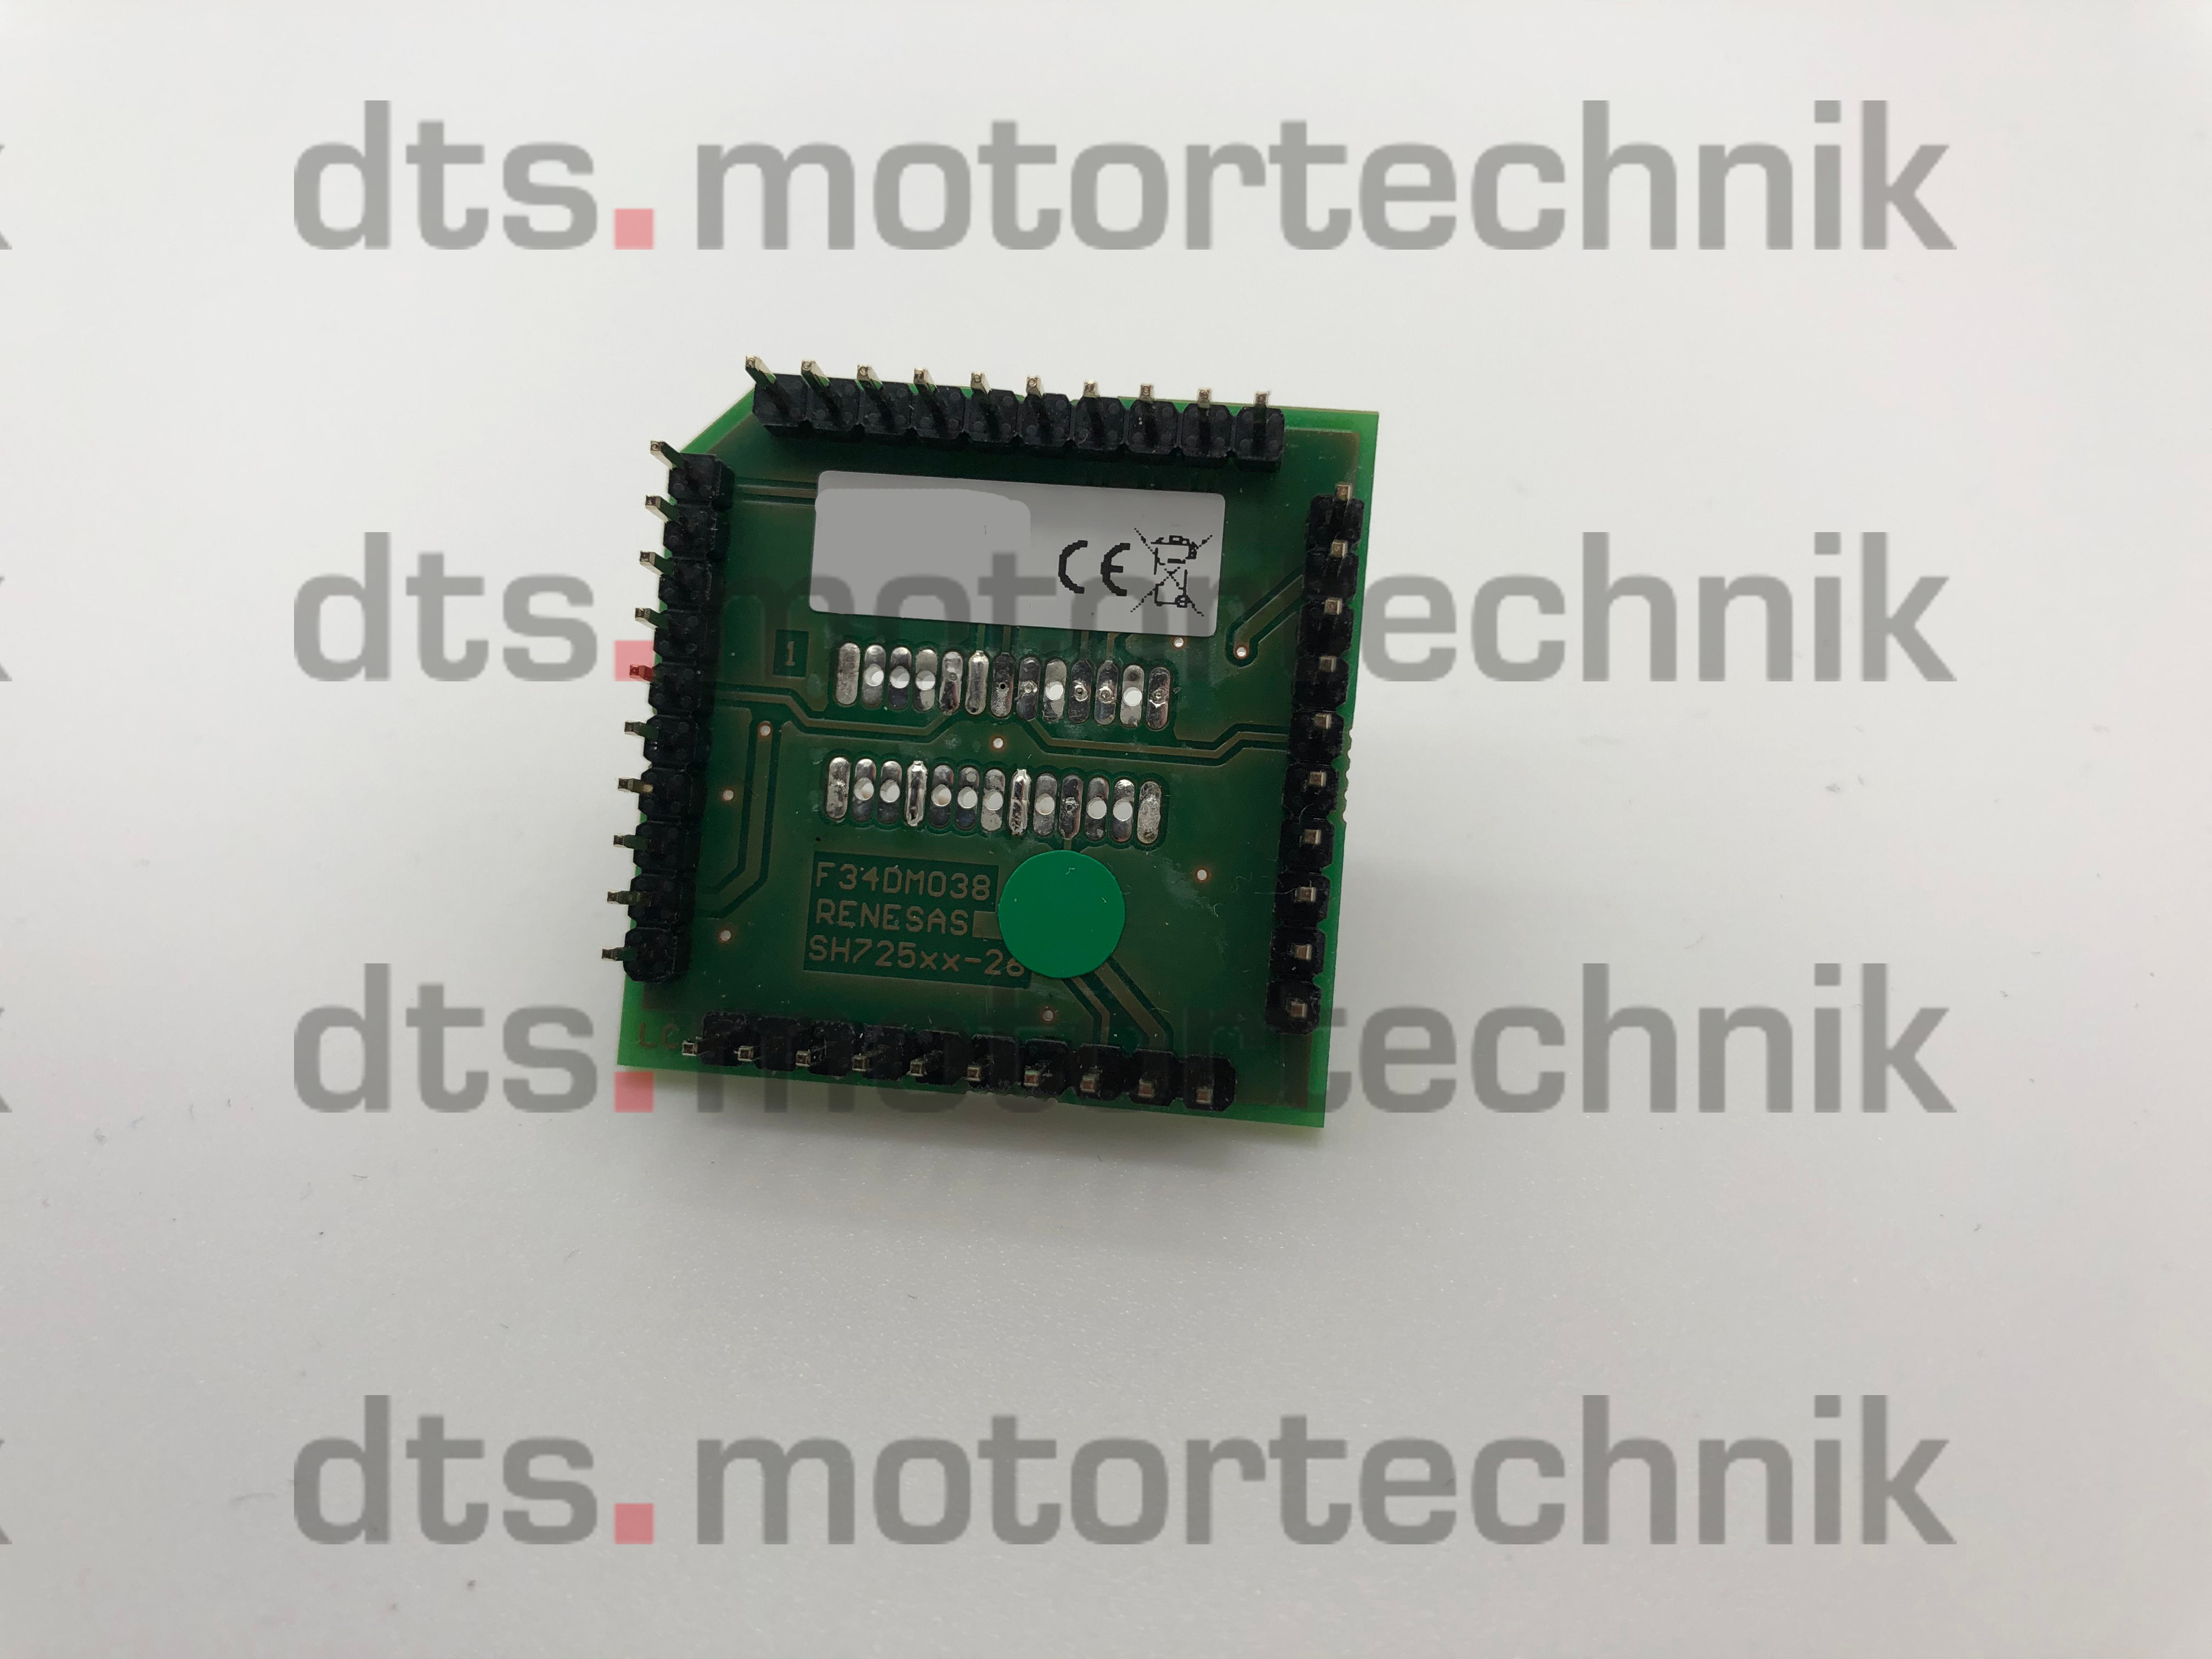 RENESAS SH725xxx-26 (1.27) terminal adapter (base board F34DM036 required)